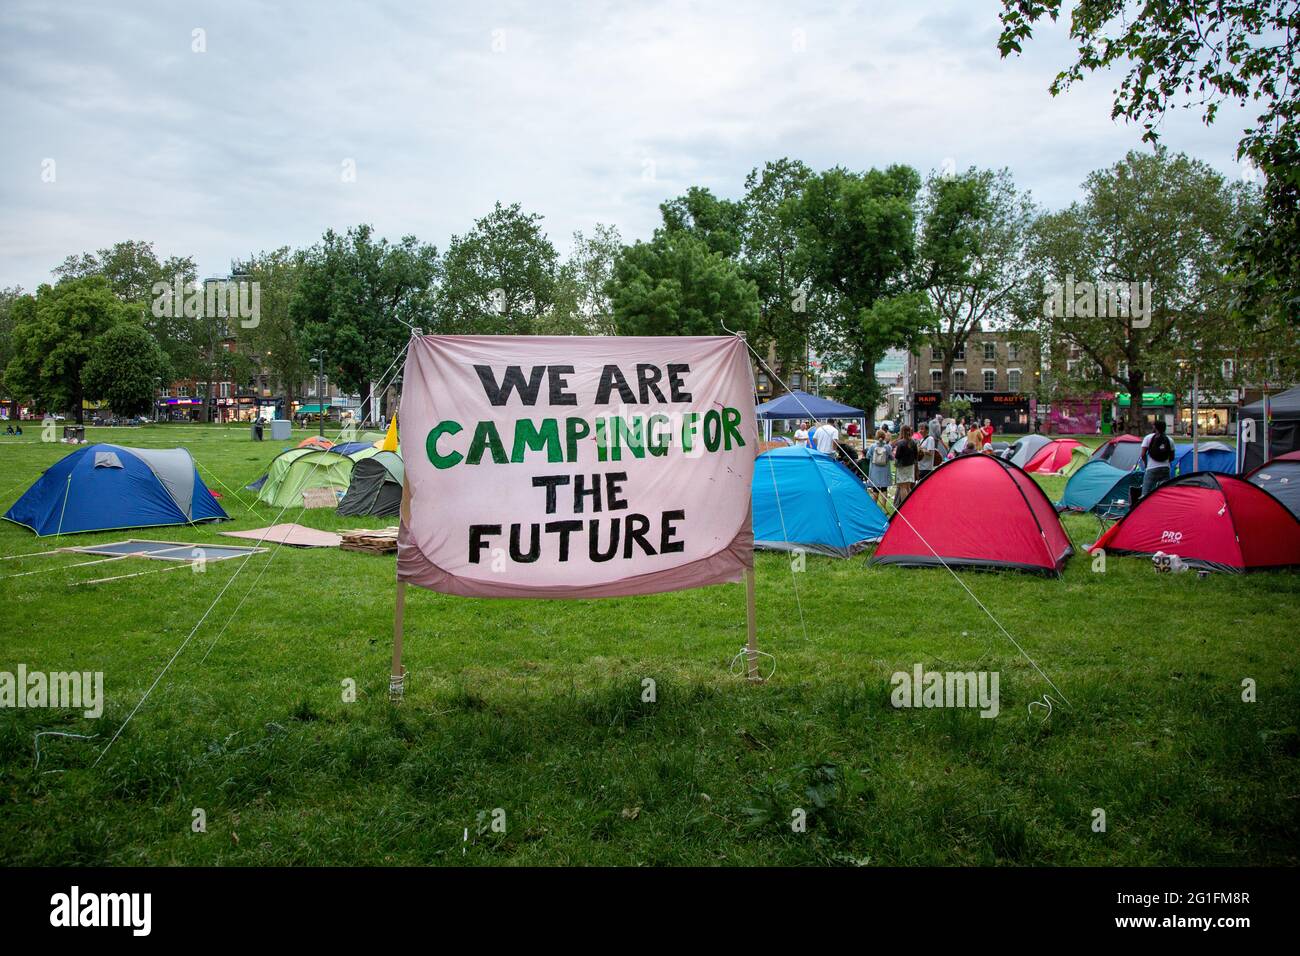 'We are camping for the future' - Signage at a freedom protest camp on Shepherd's Bush Green, London, UK. June 2021 Stock Photo